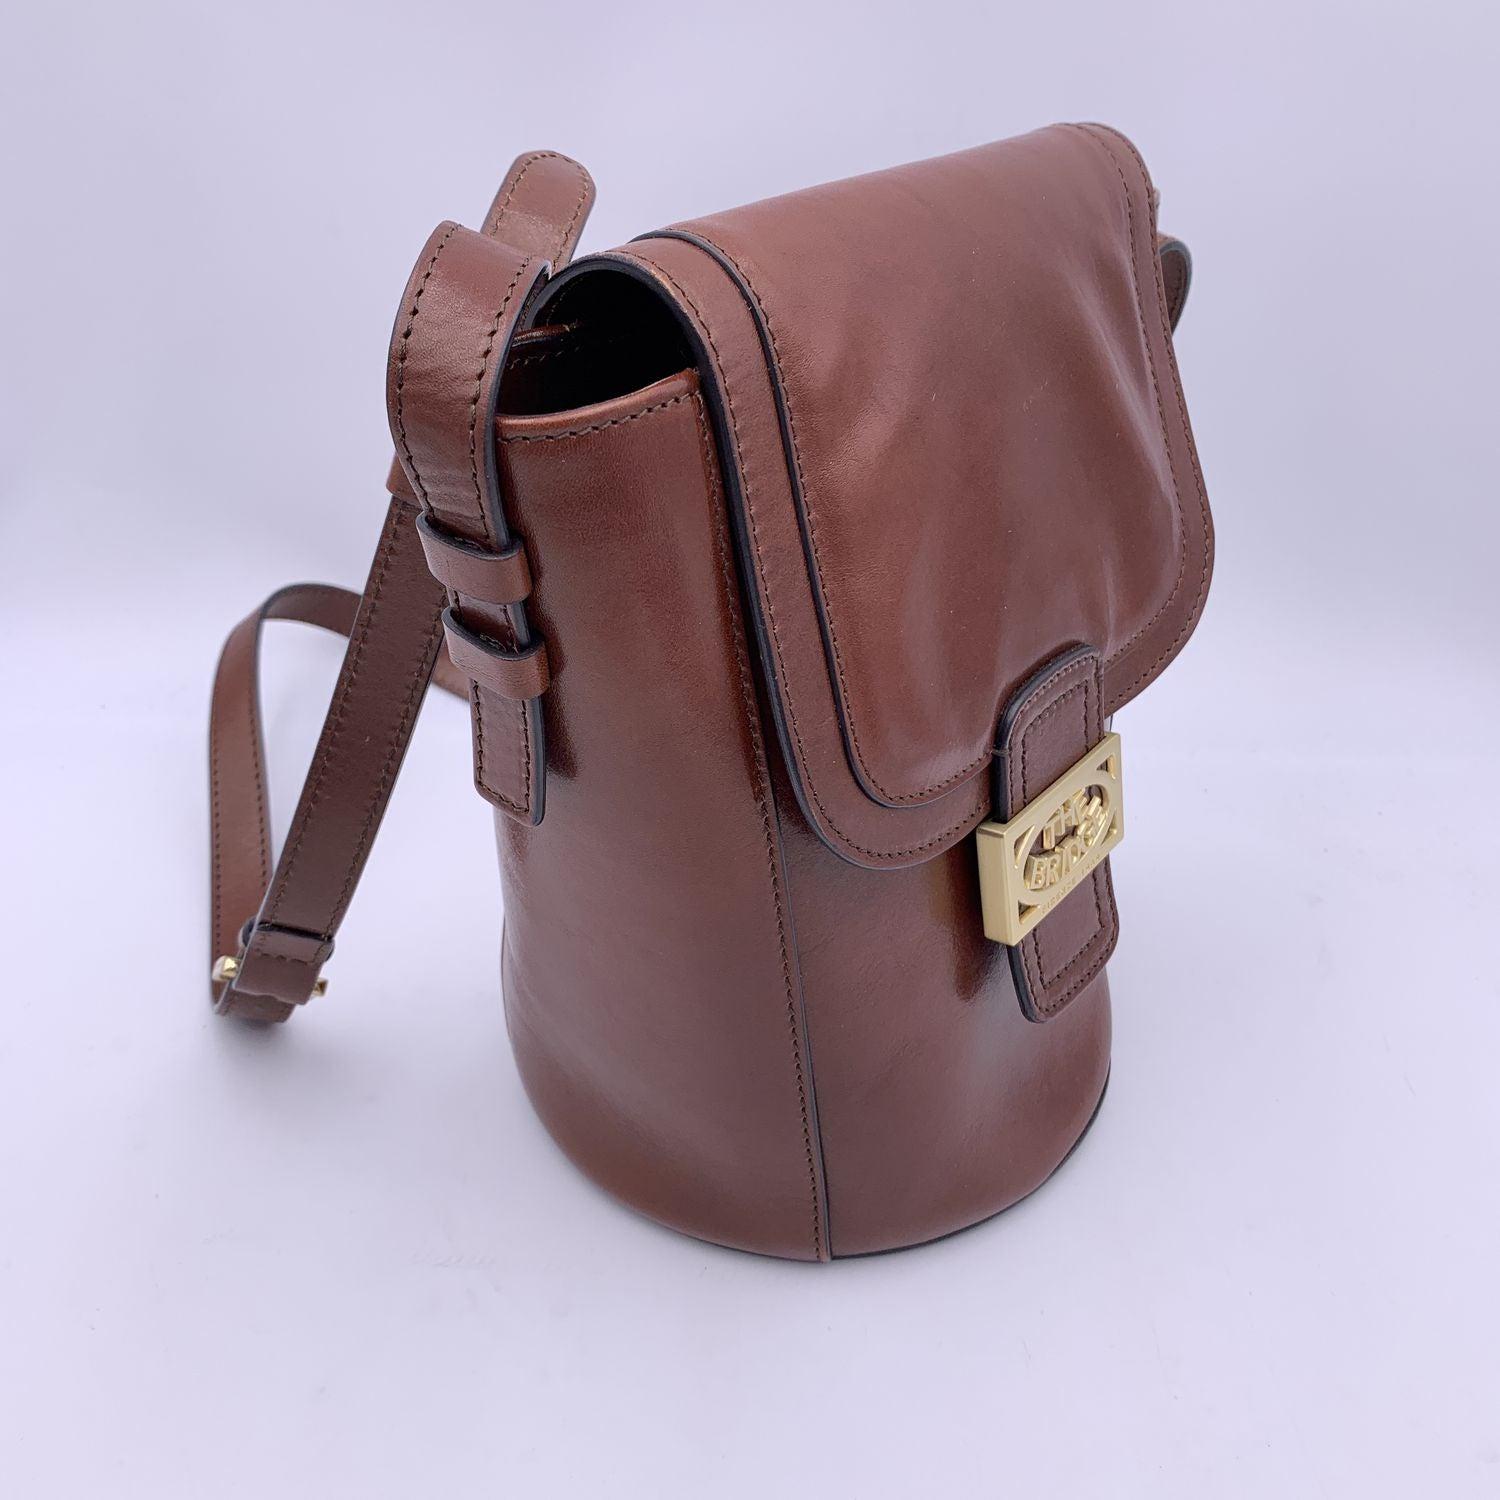 The Bridge Brown Leather Shoulder Bag Flap Bucket In Excellent Condition For Sale In Rome, Rome